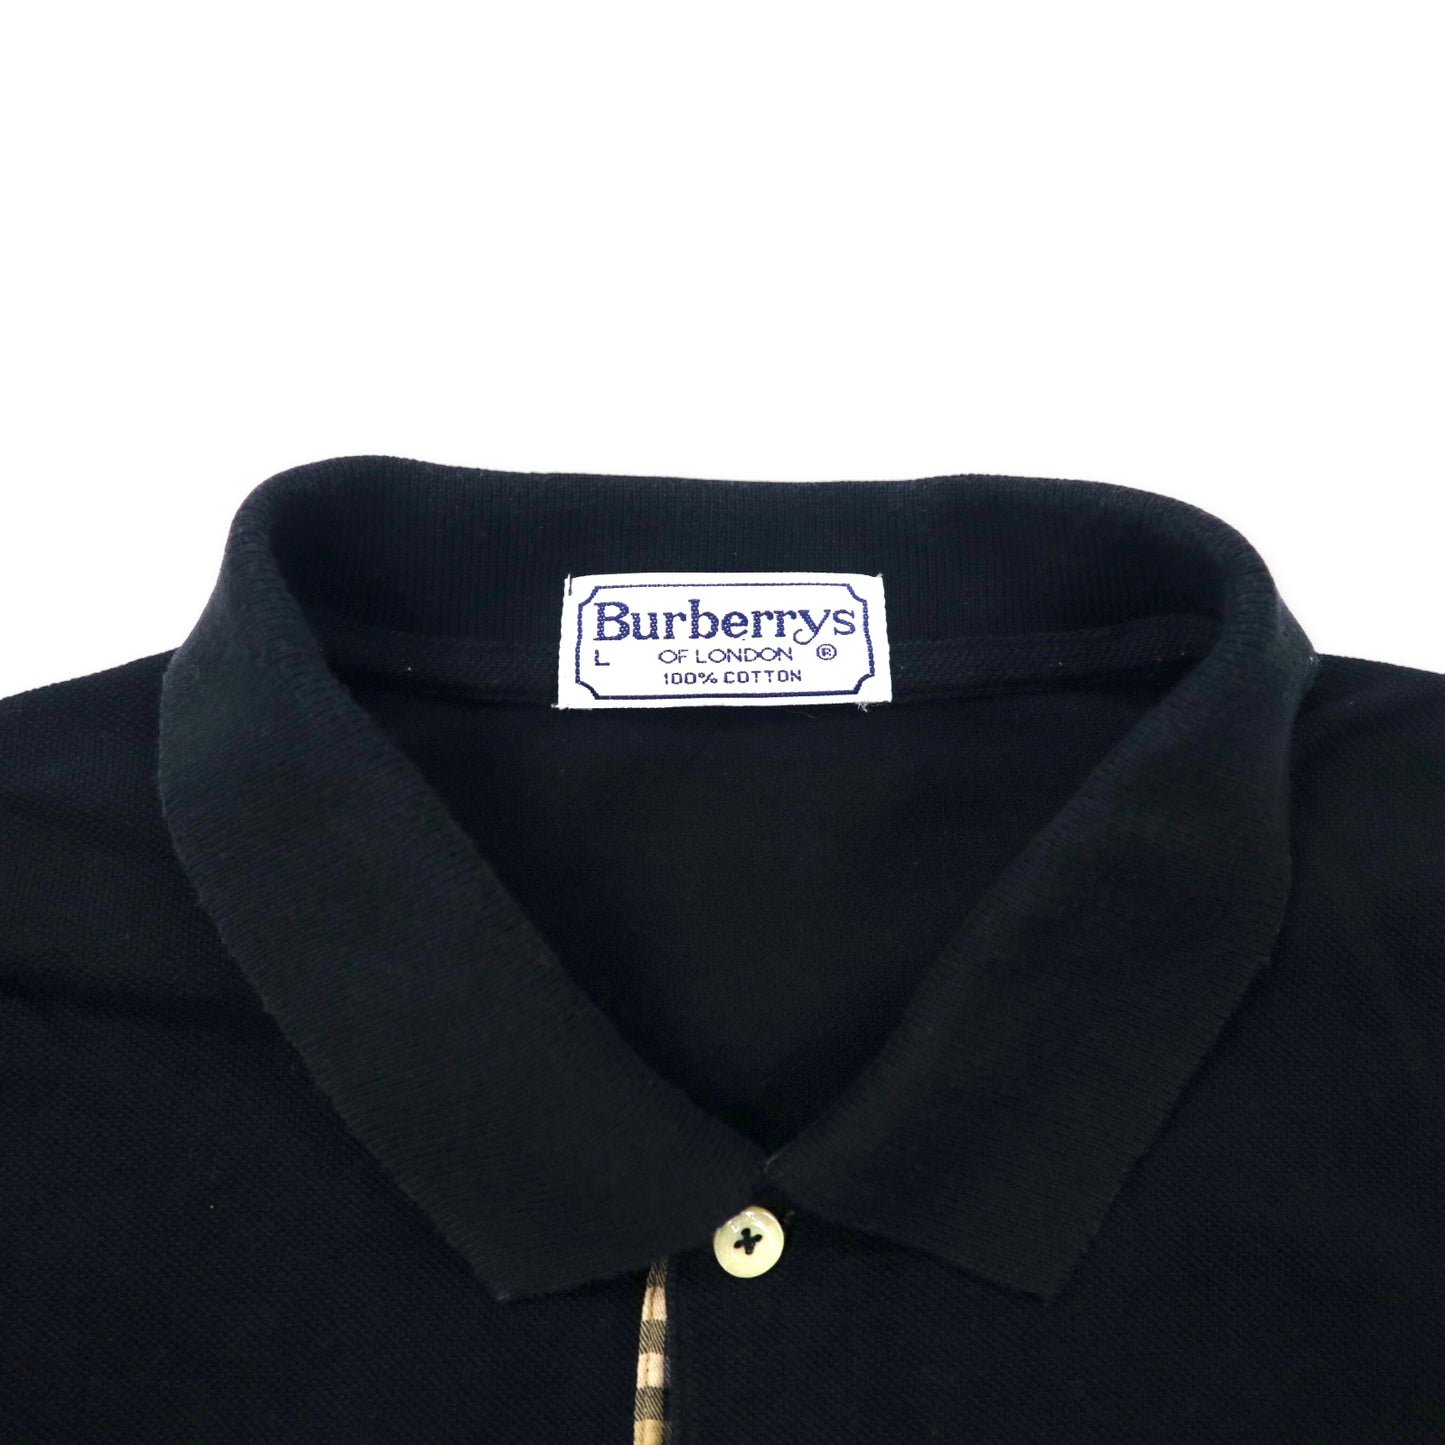 BURBERRYS CHECKED Switching Polo Shirt L Black Cotton One Point